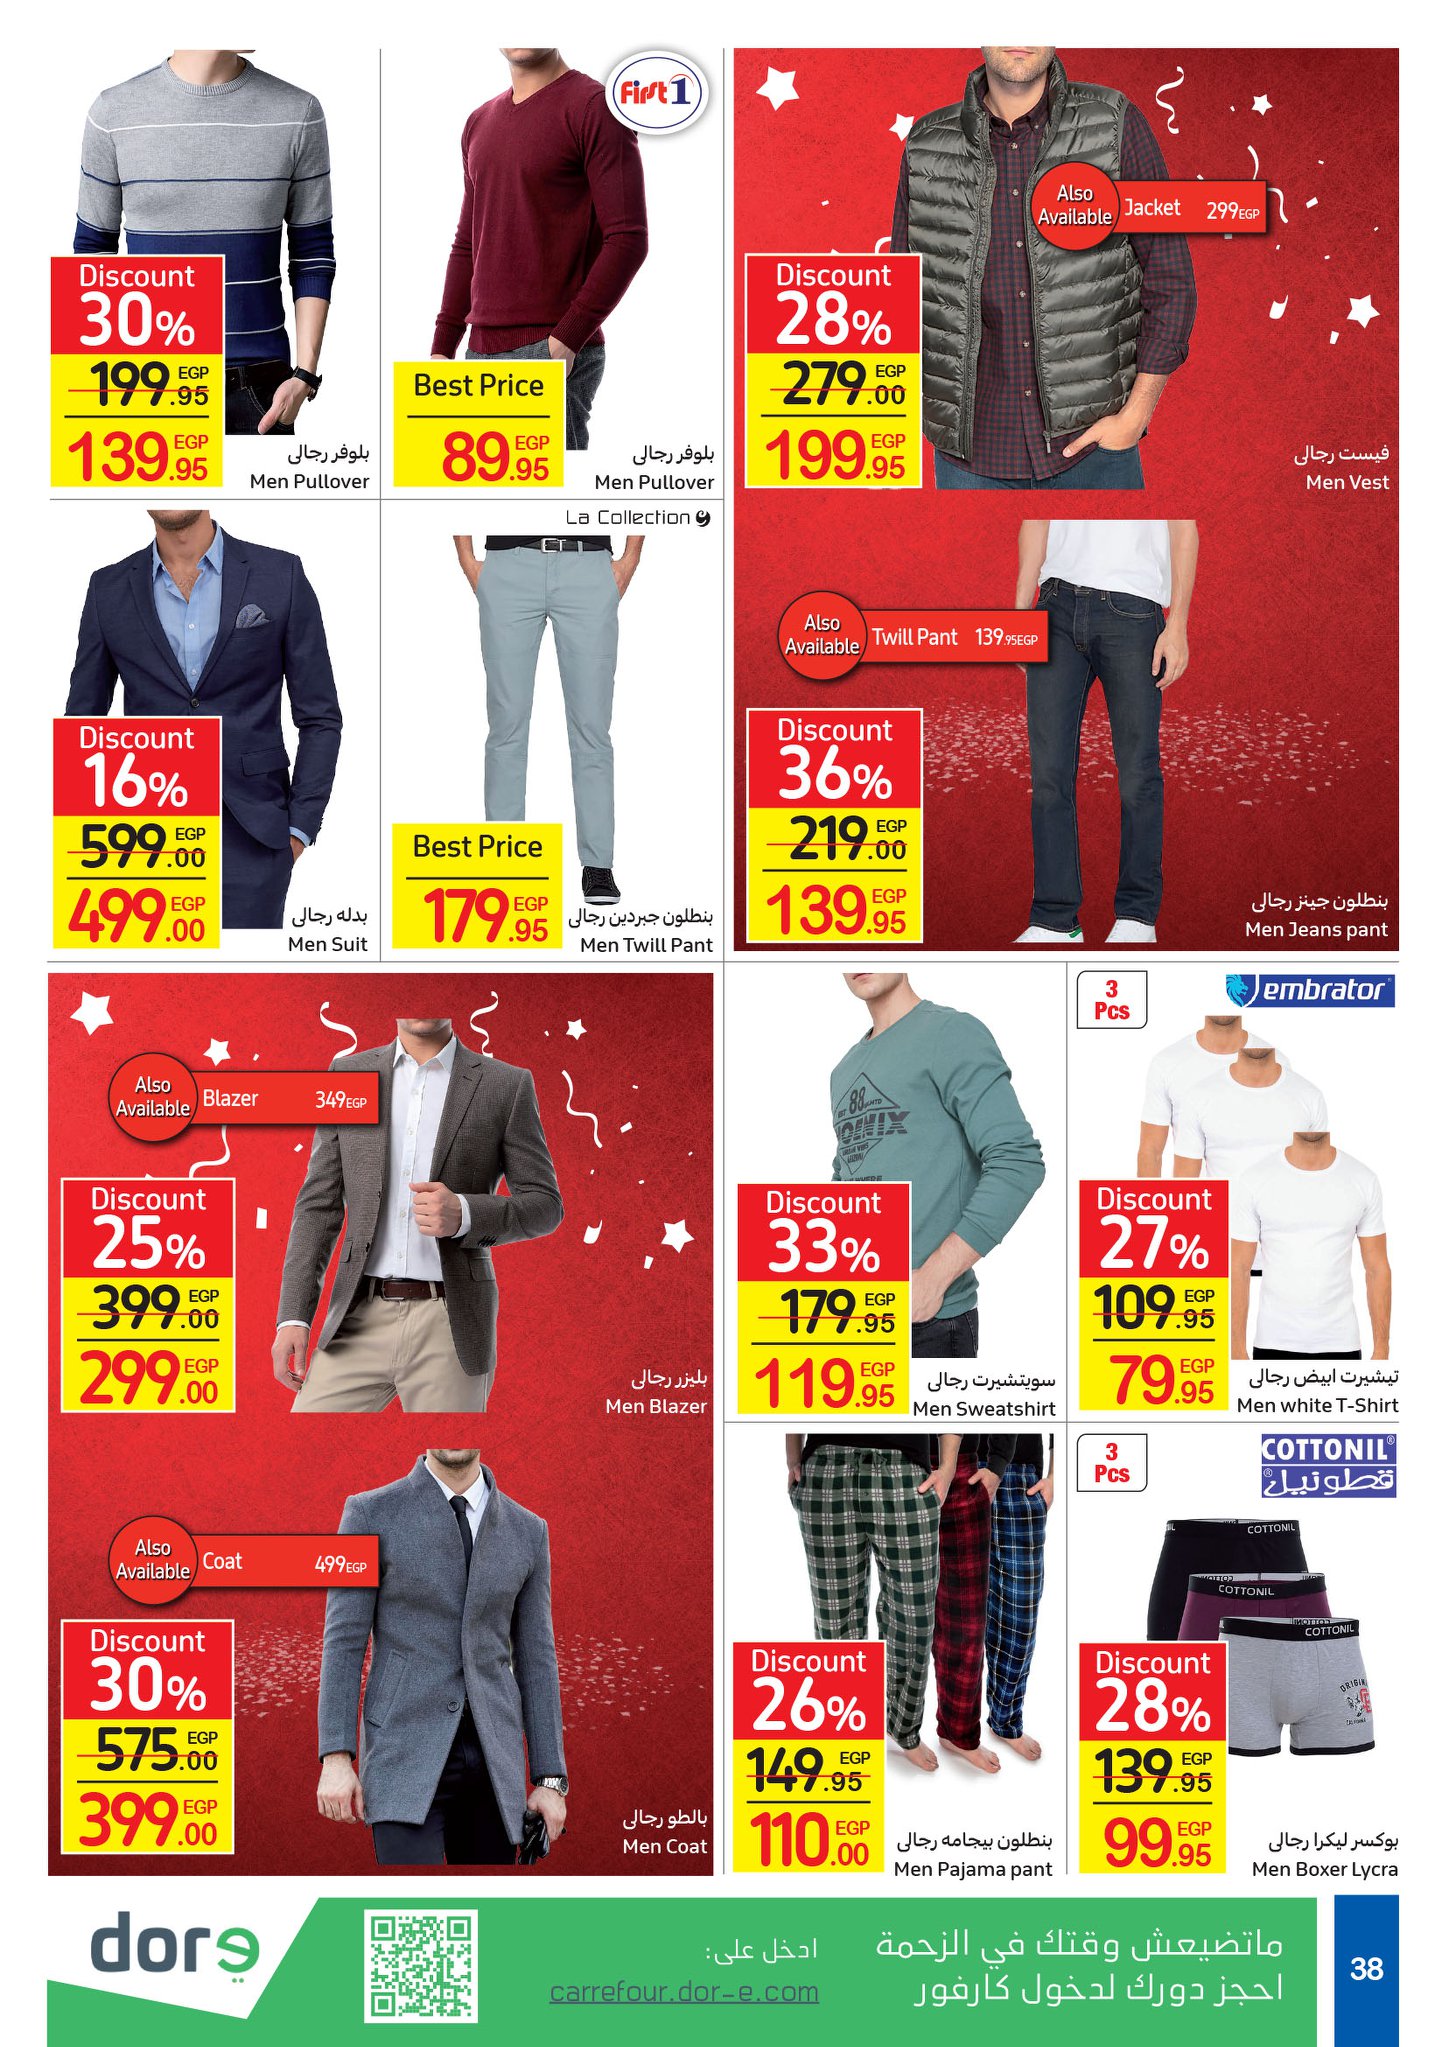 Carrefour birthday offer New Year 2021 catalog 35